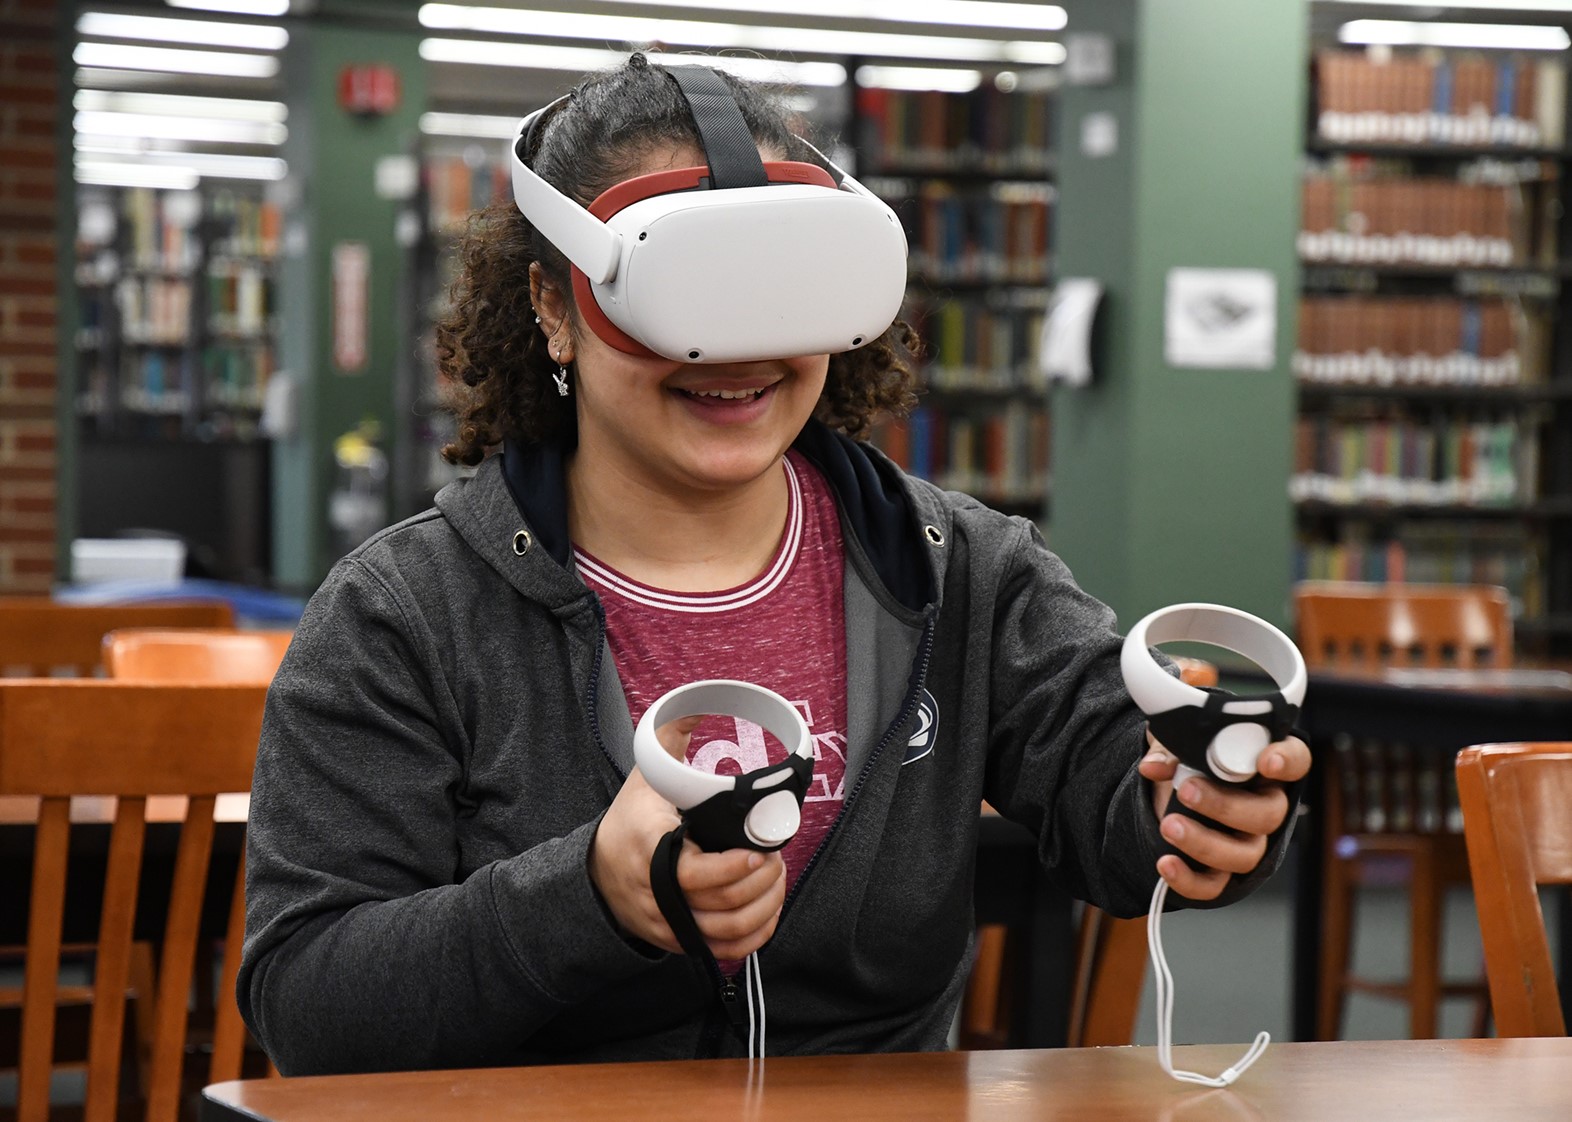 Photograph shows a student with a VR headset and hand controllers. They are sitting at a desk inside of the library.